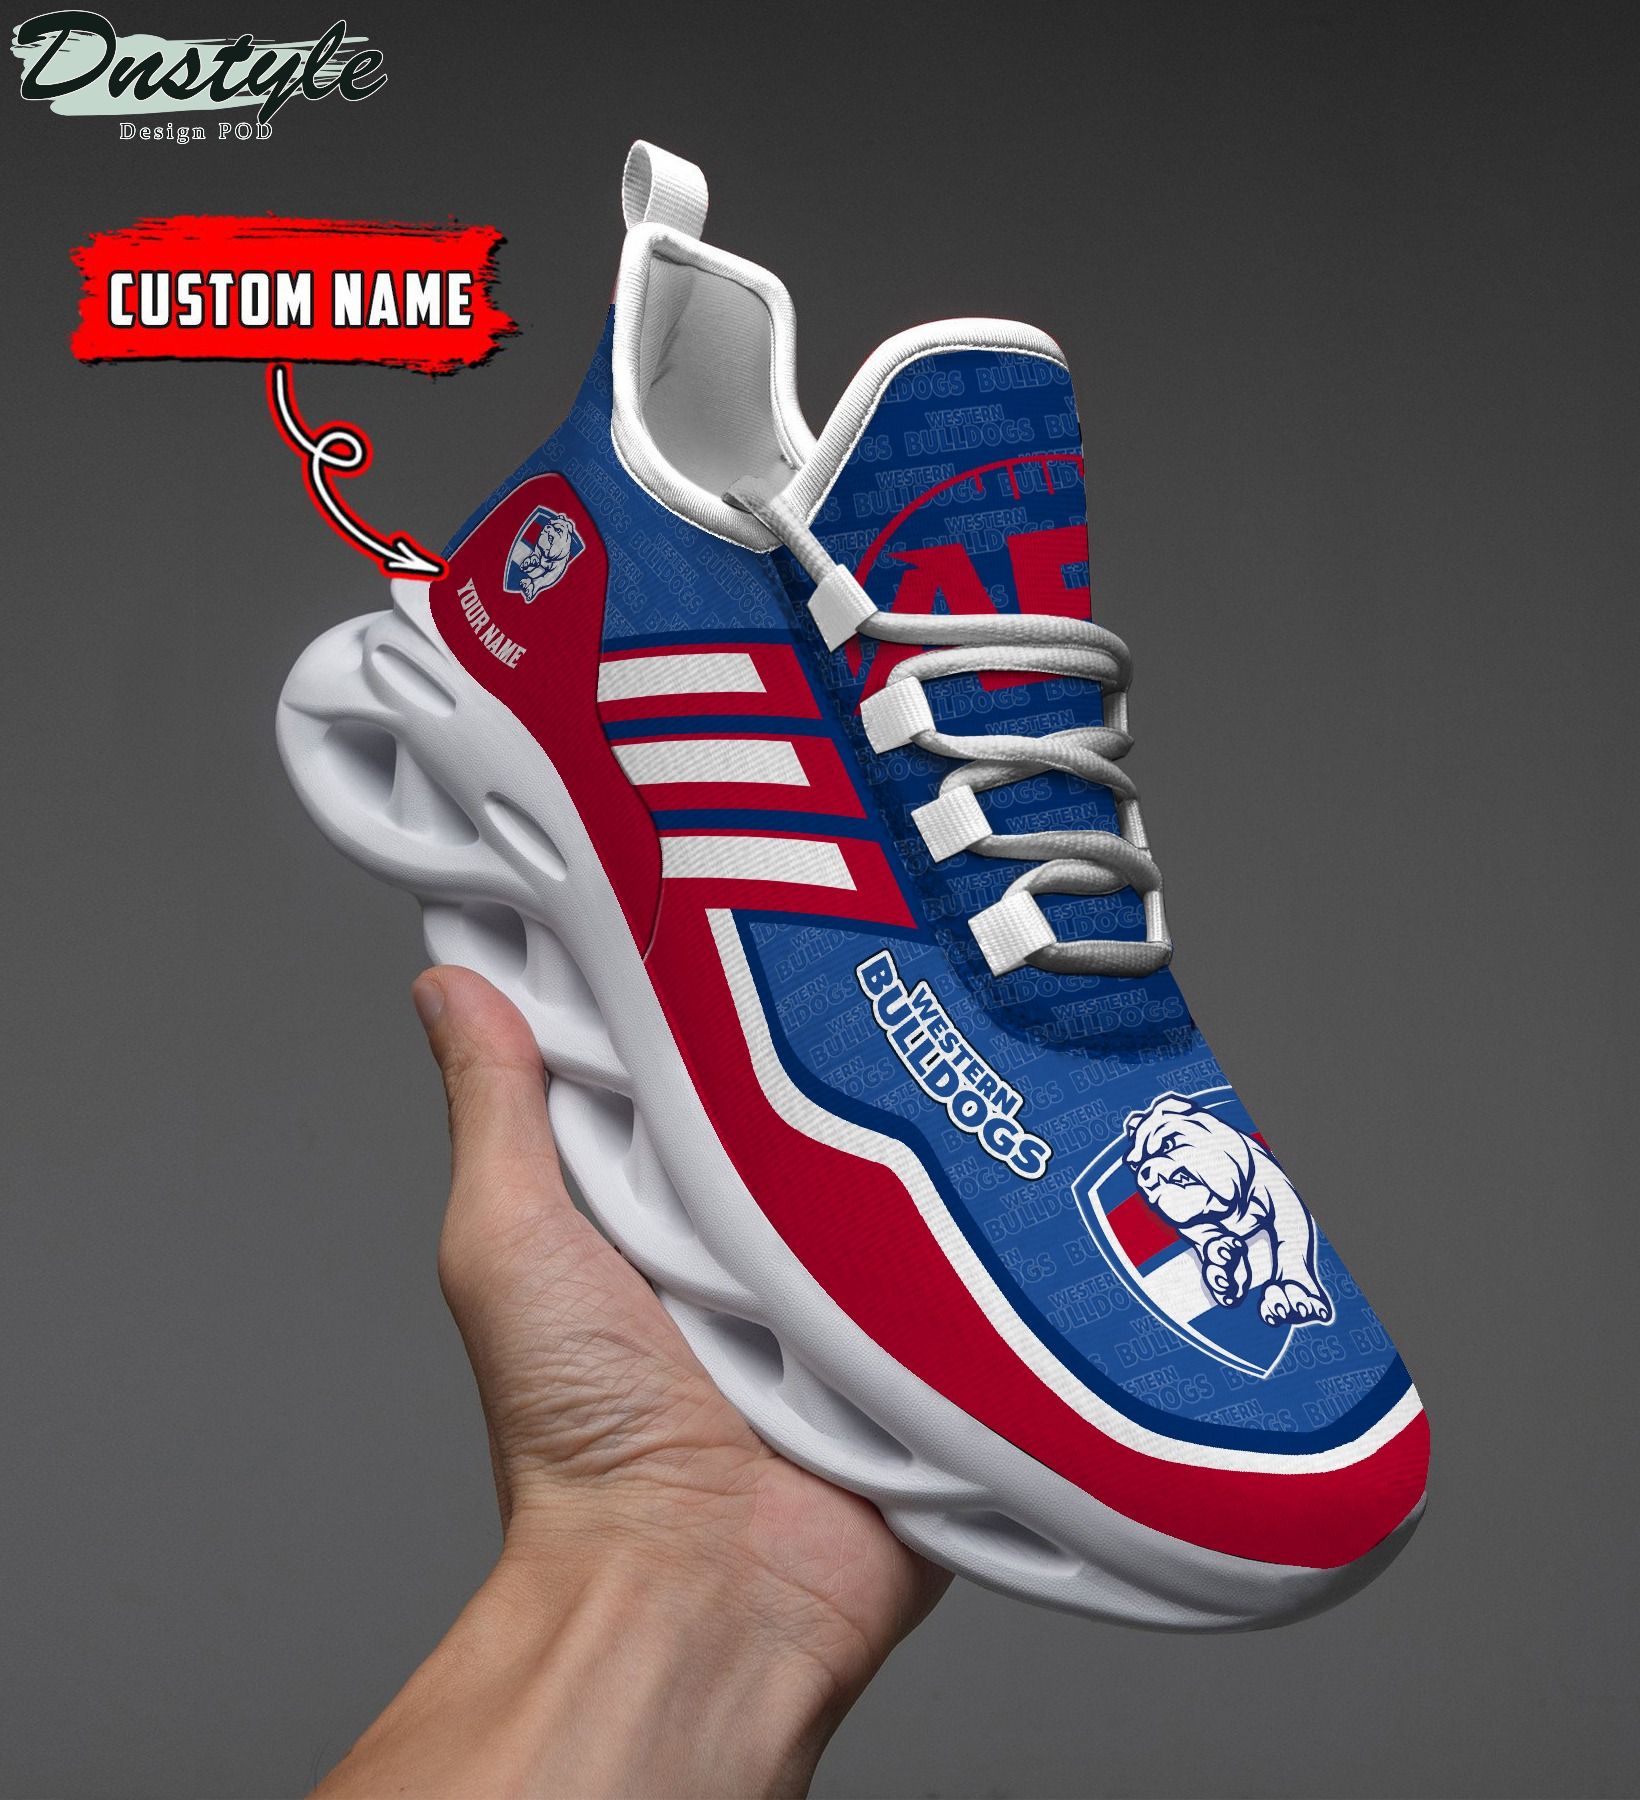 Western Bulldogs AFL personalized clunky max soul shoes